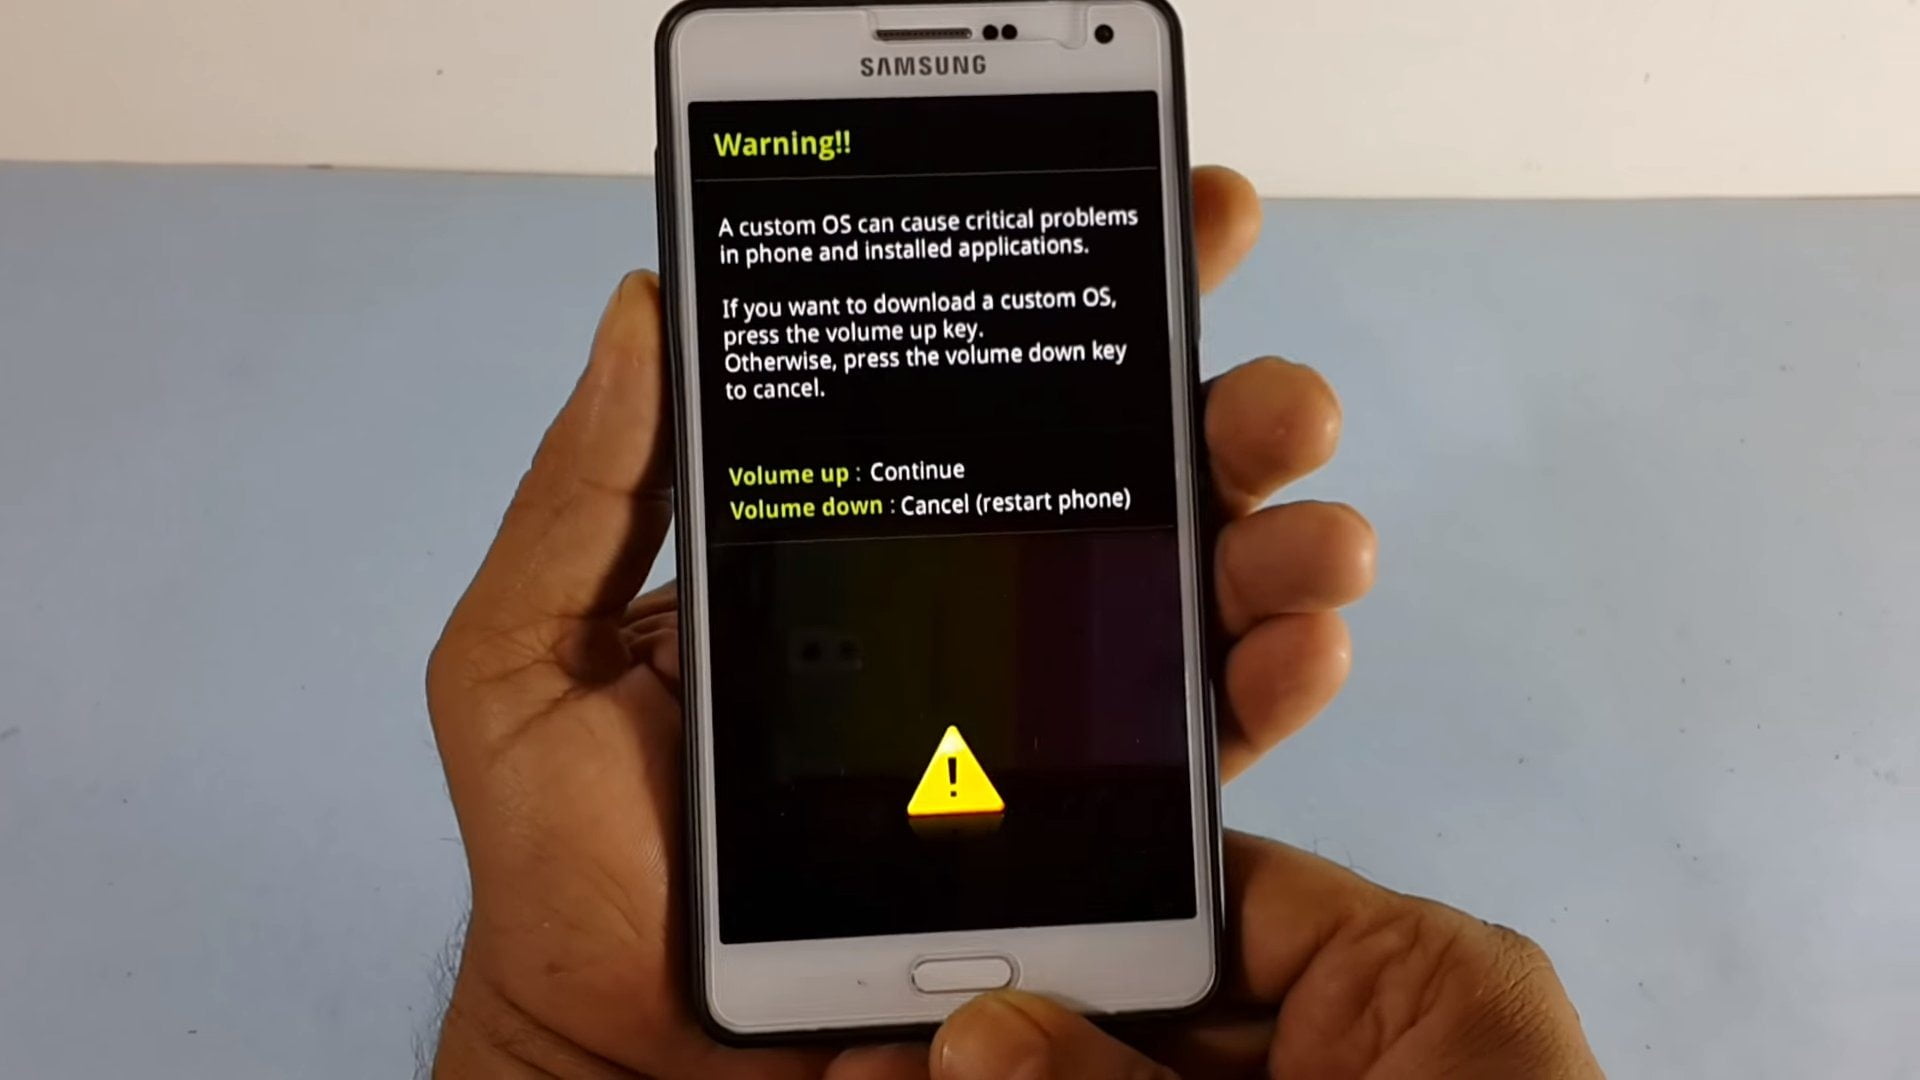 Android Rooting Guide: Risks And Procedure To Root An Android Device